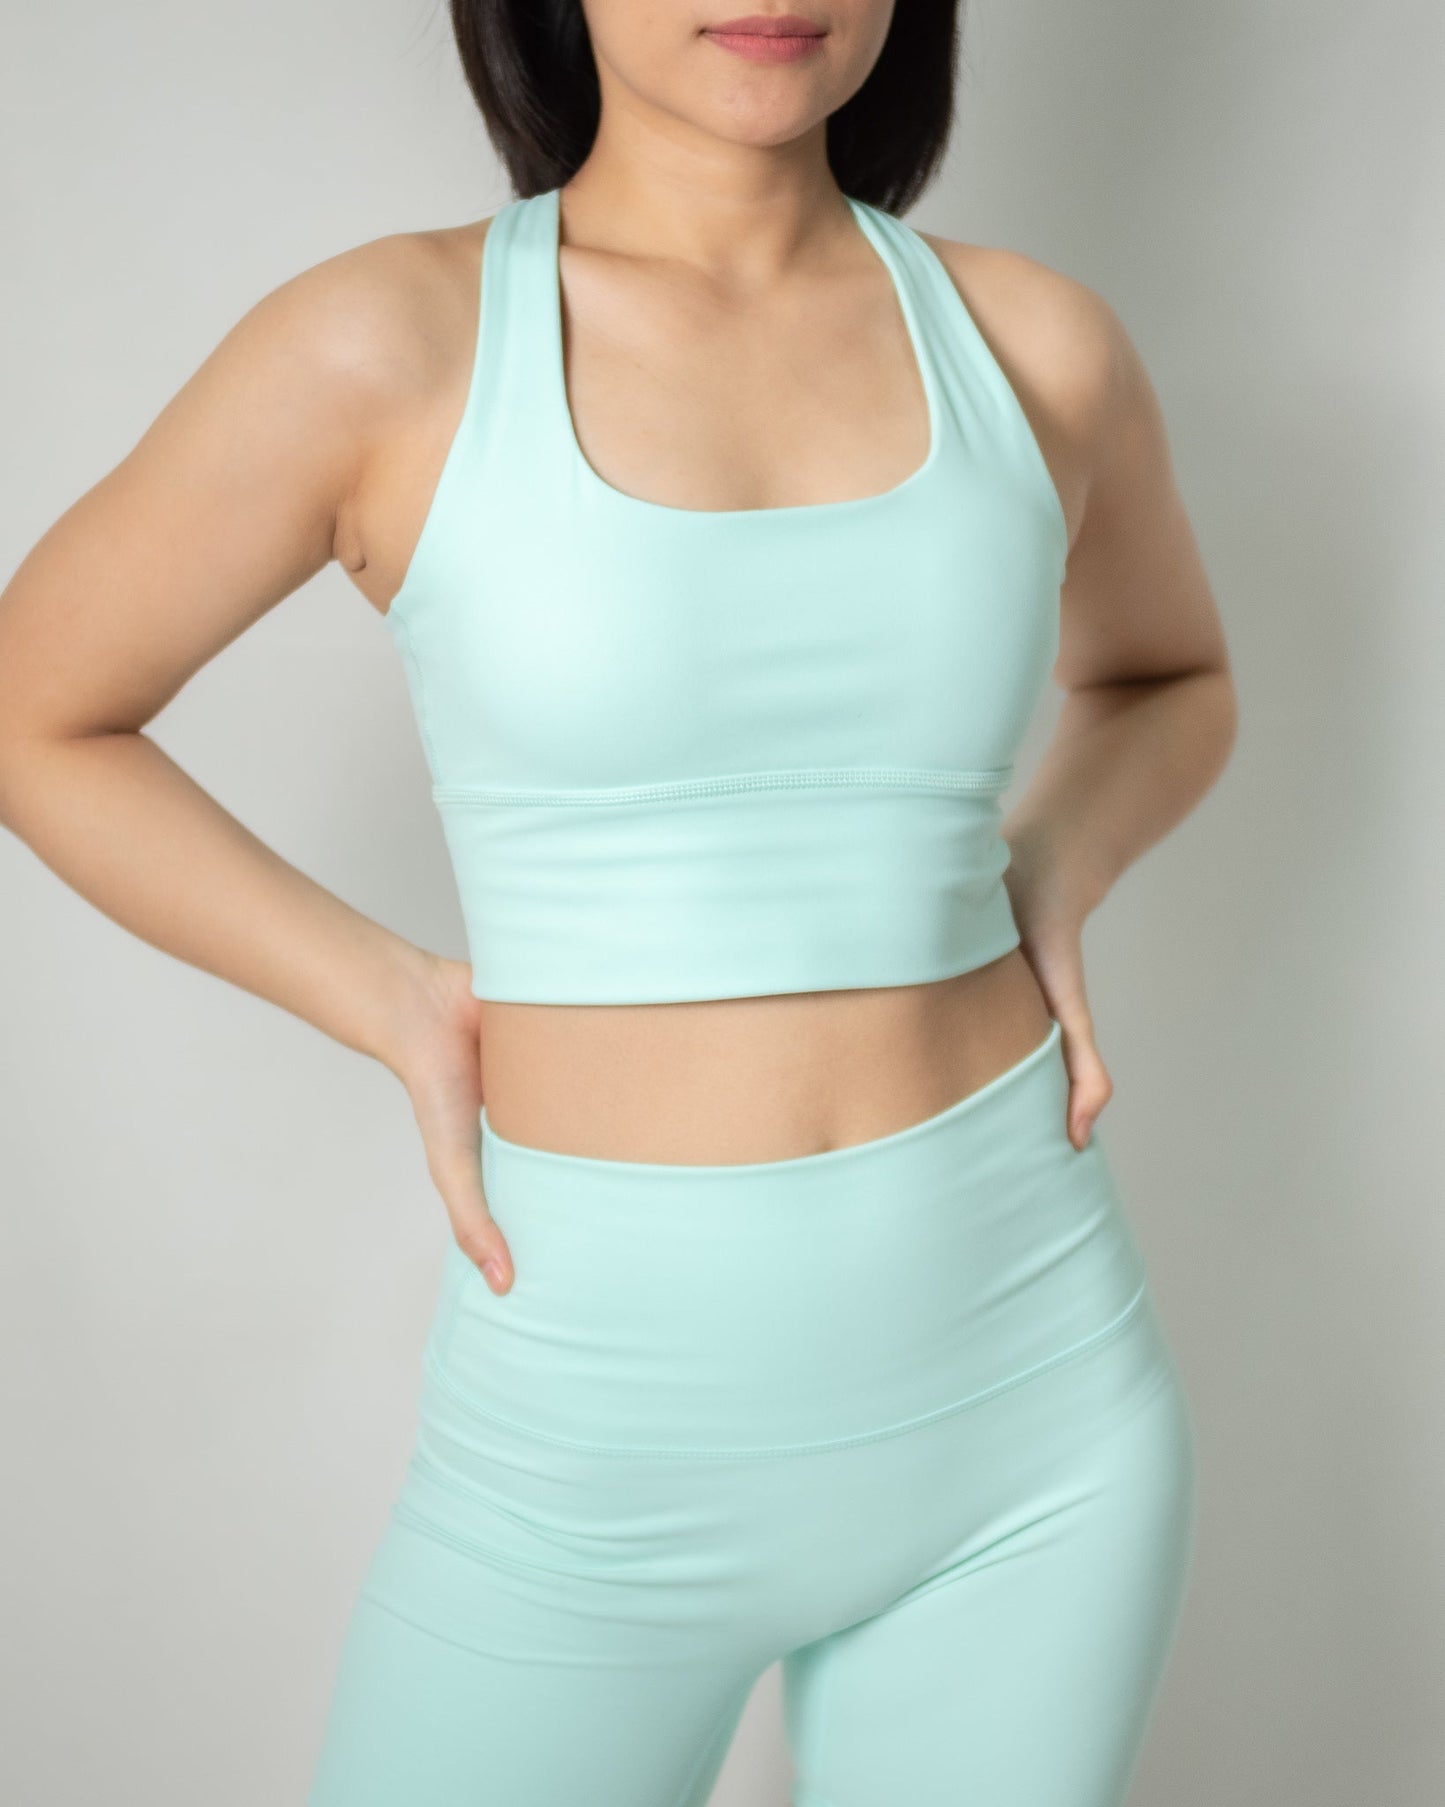 Spice bra in Arctic blue - New Day Activewear